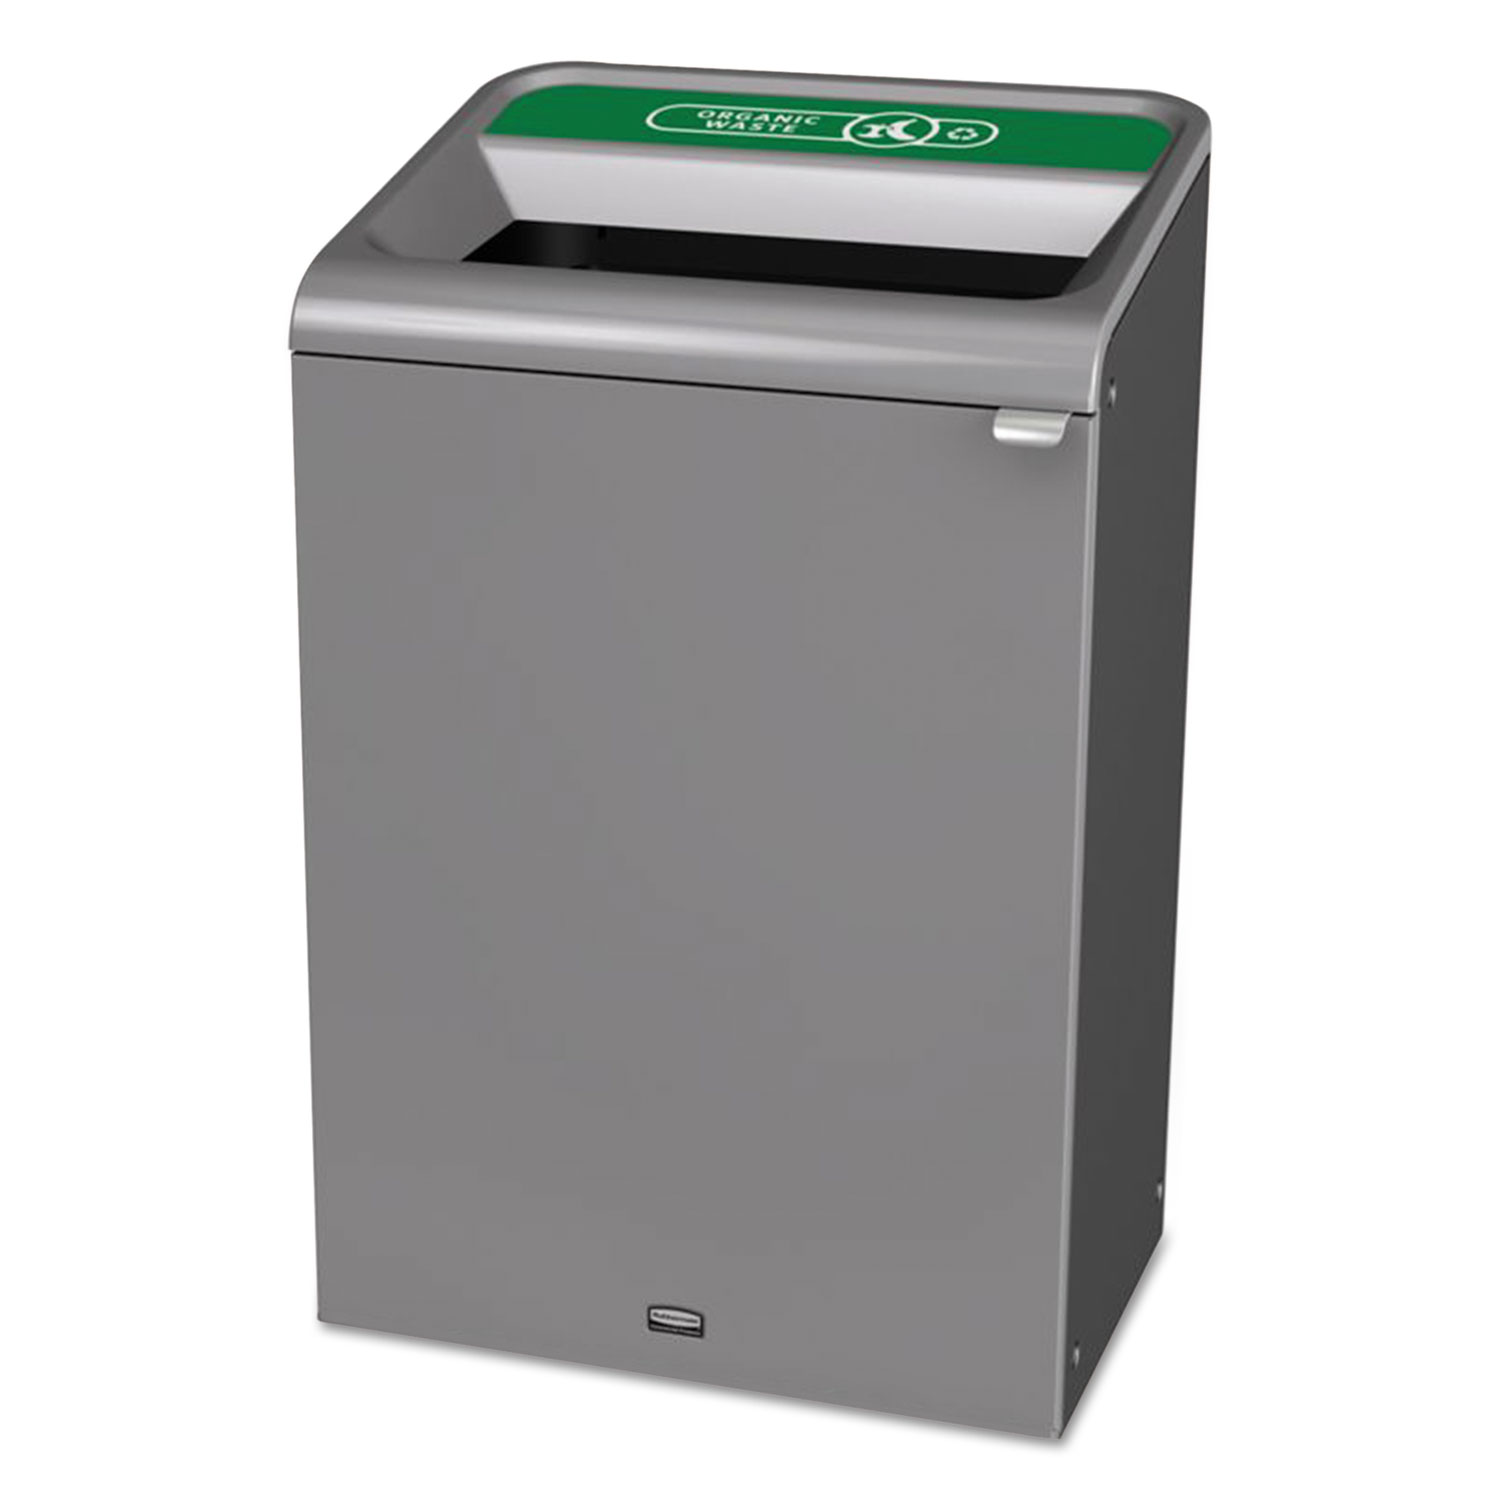 Configure Indoor Recycling Waste Receptacle, 33 gal, Gray, Organic Waste